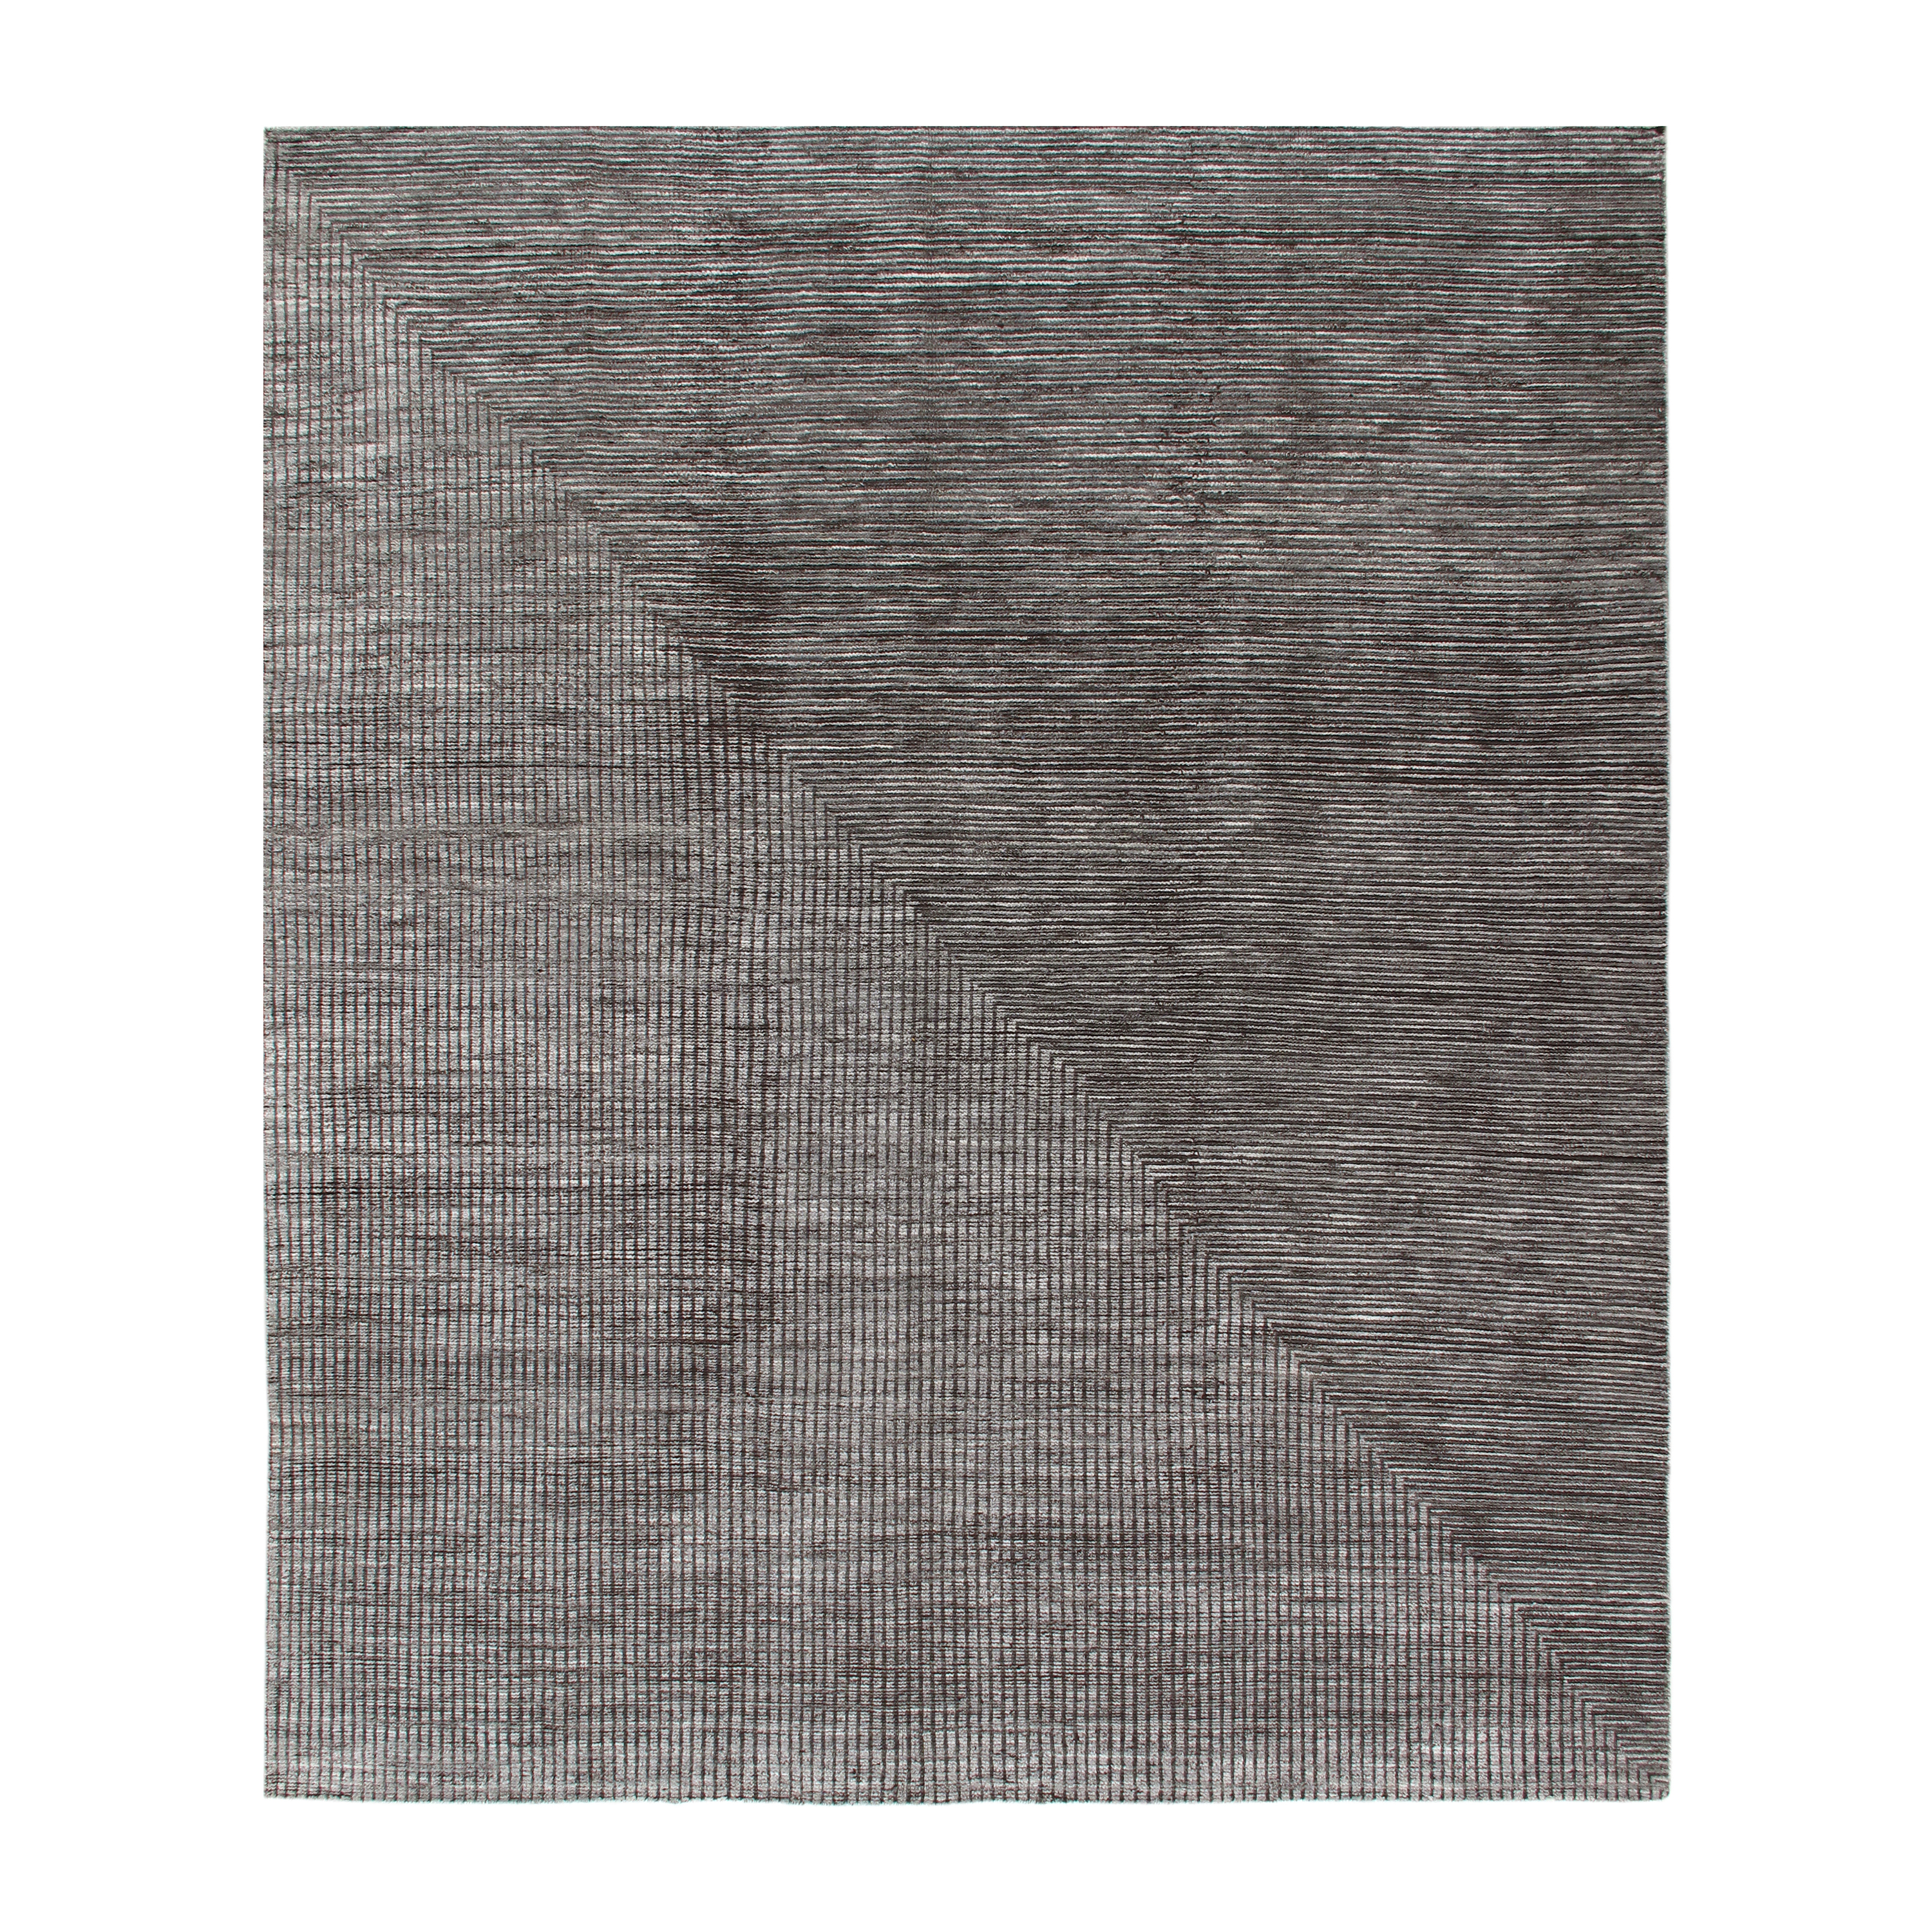 This Apollo rug is hand-knotted and made of wool  and bamboo silk.